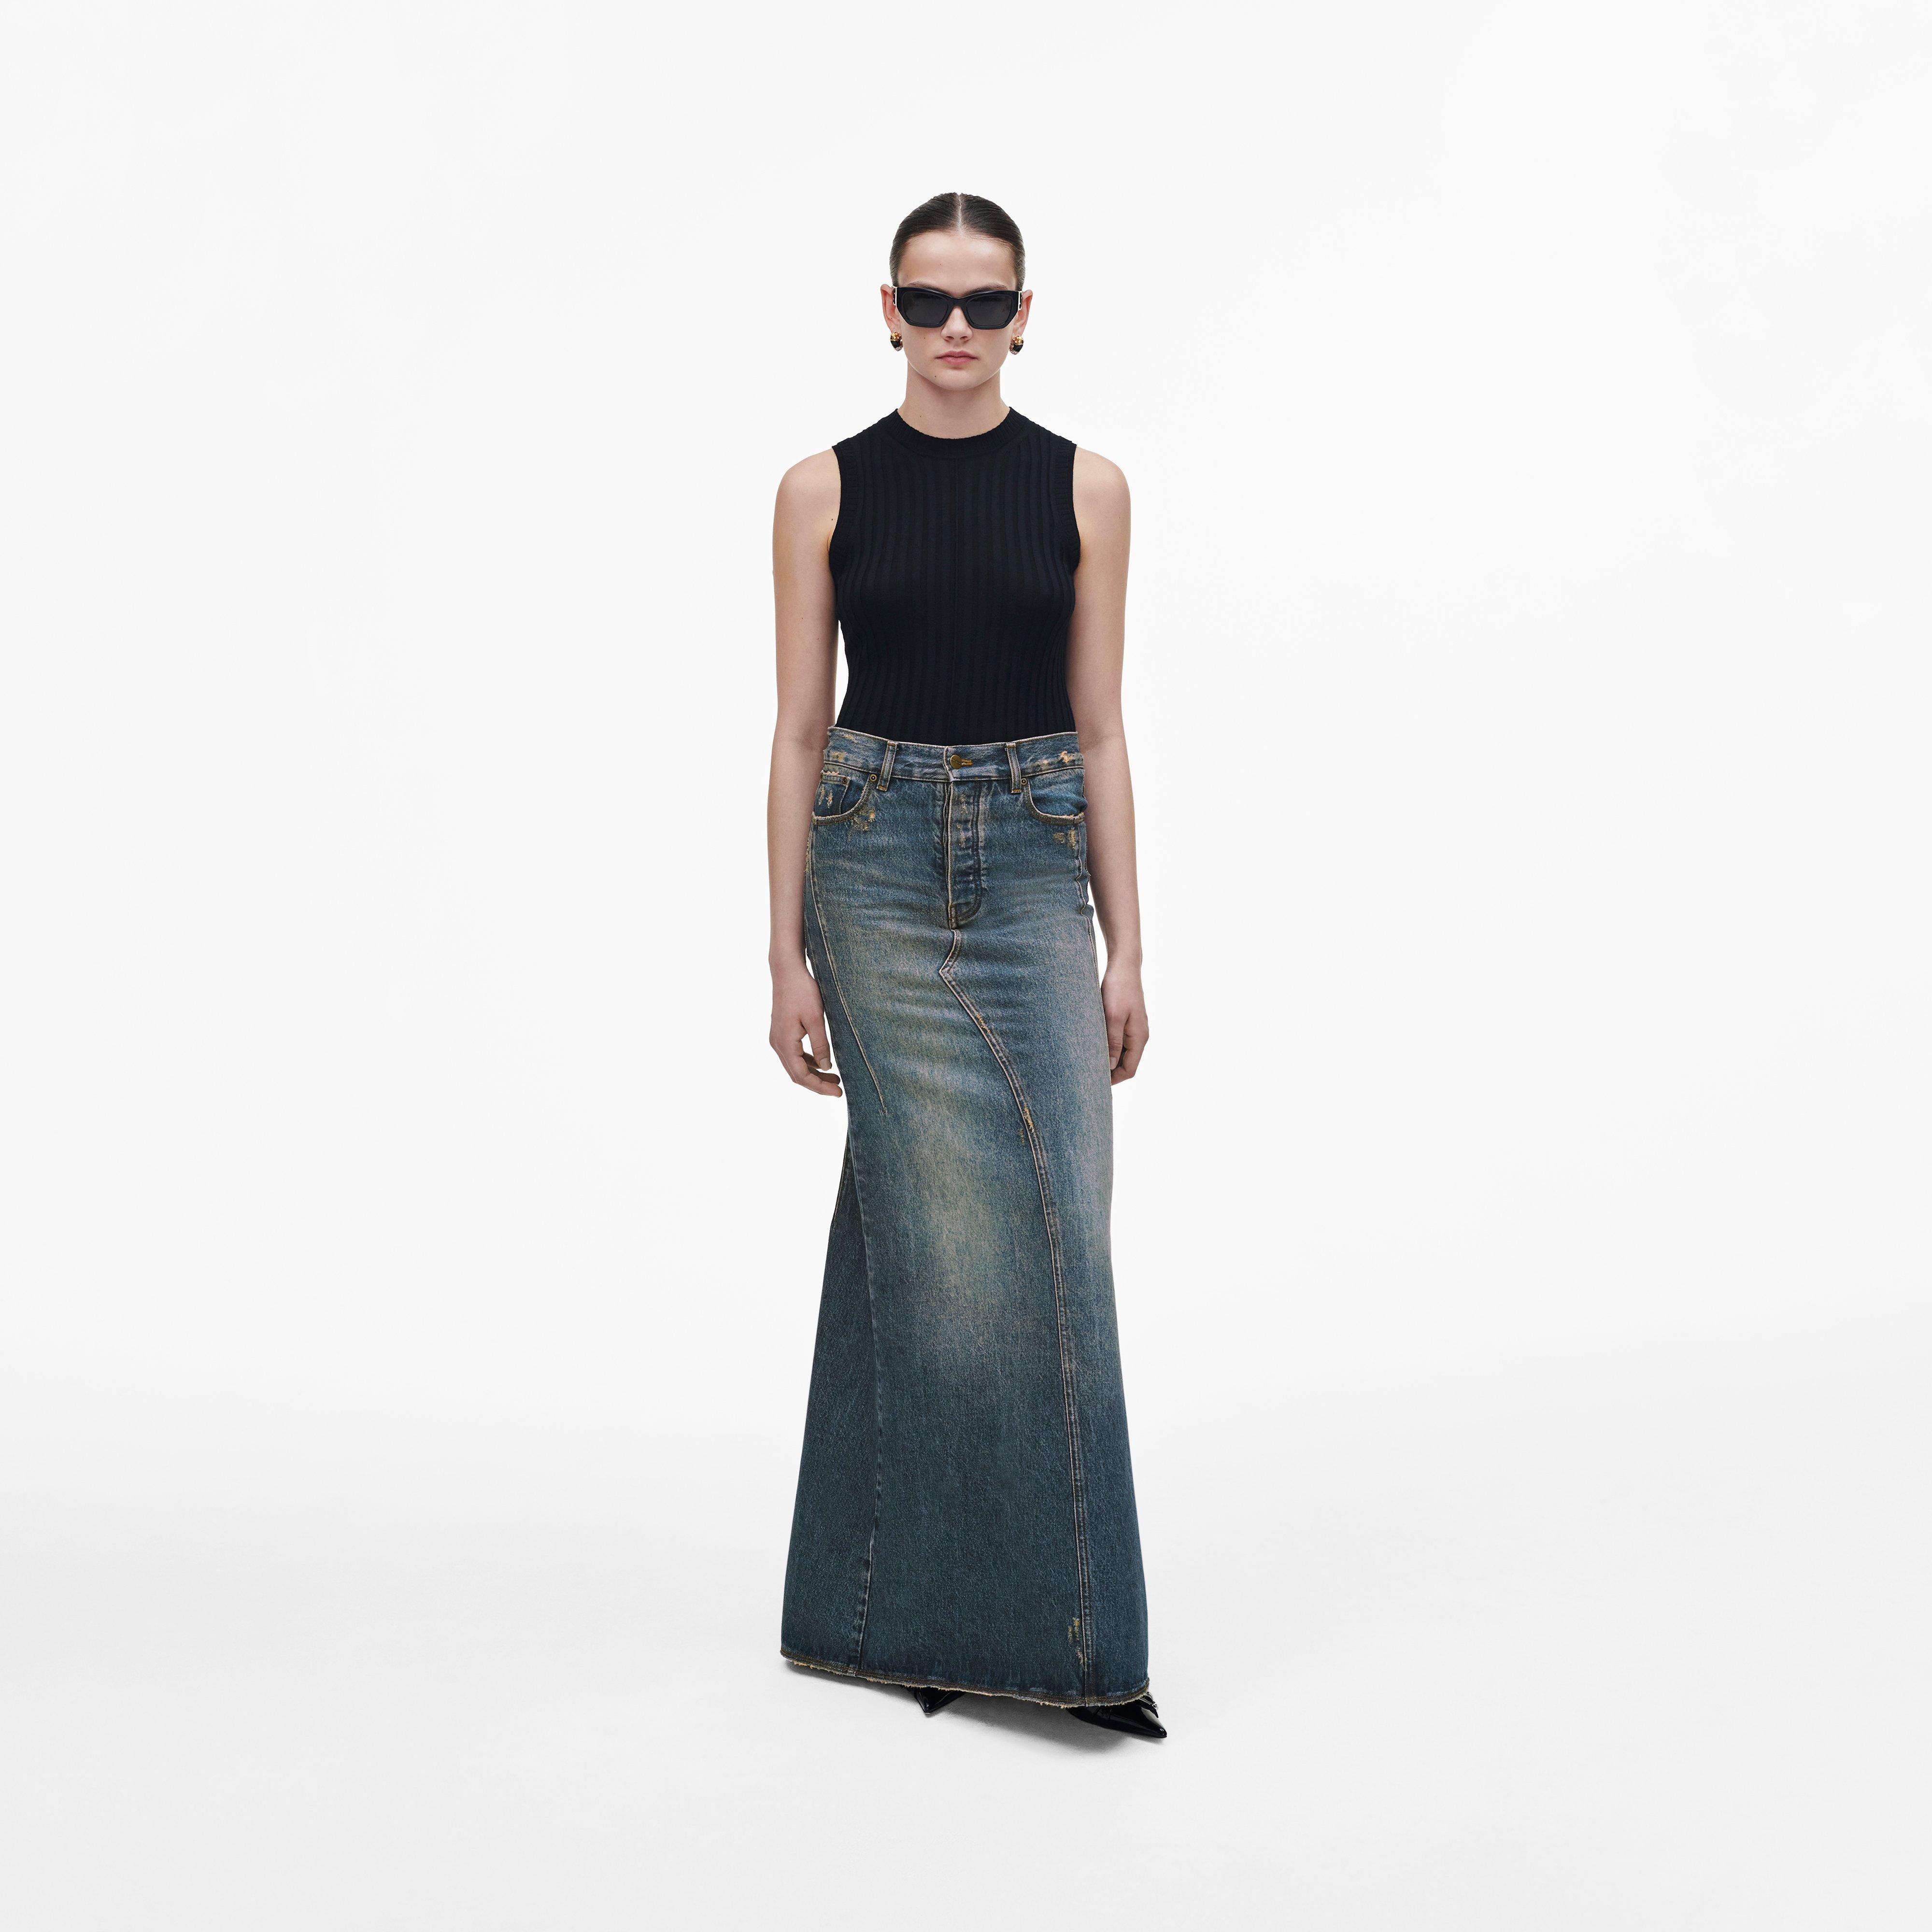 Marc by Marc jacobs Long Fluted Skirt,GRUNGE INDIGO